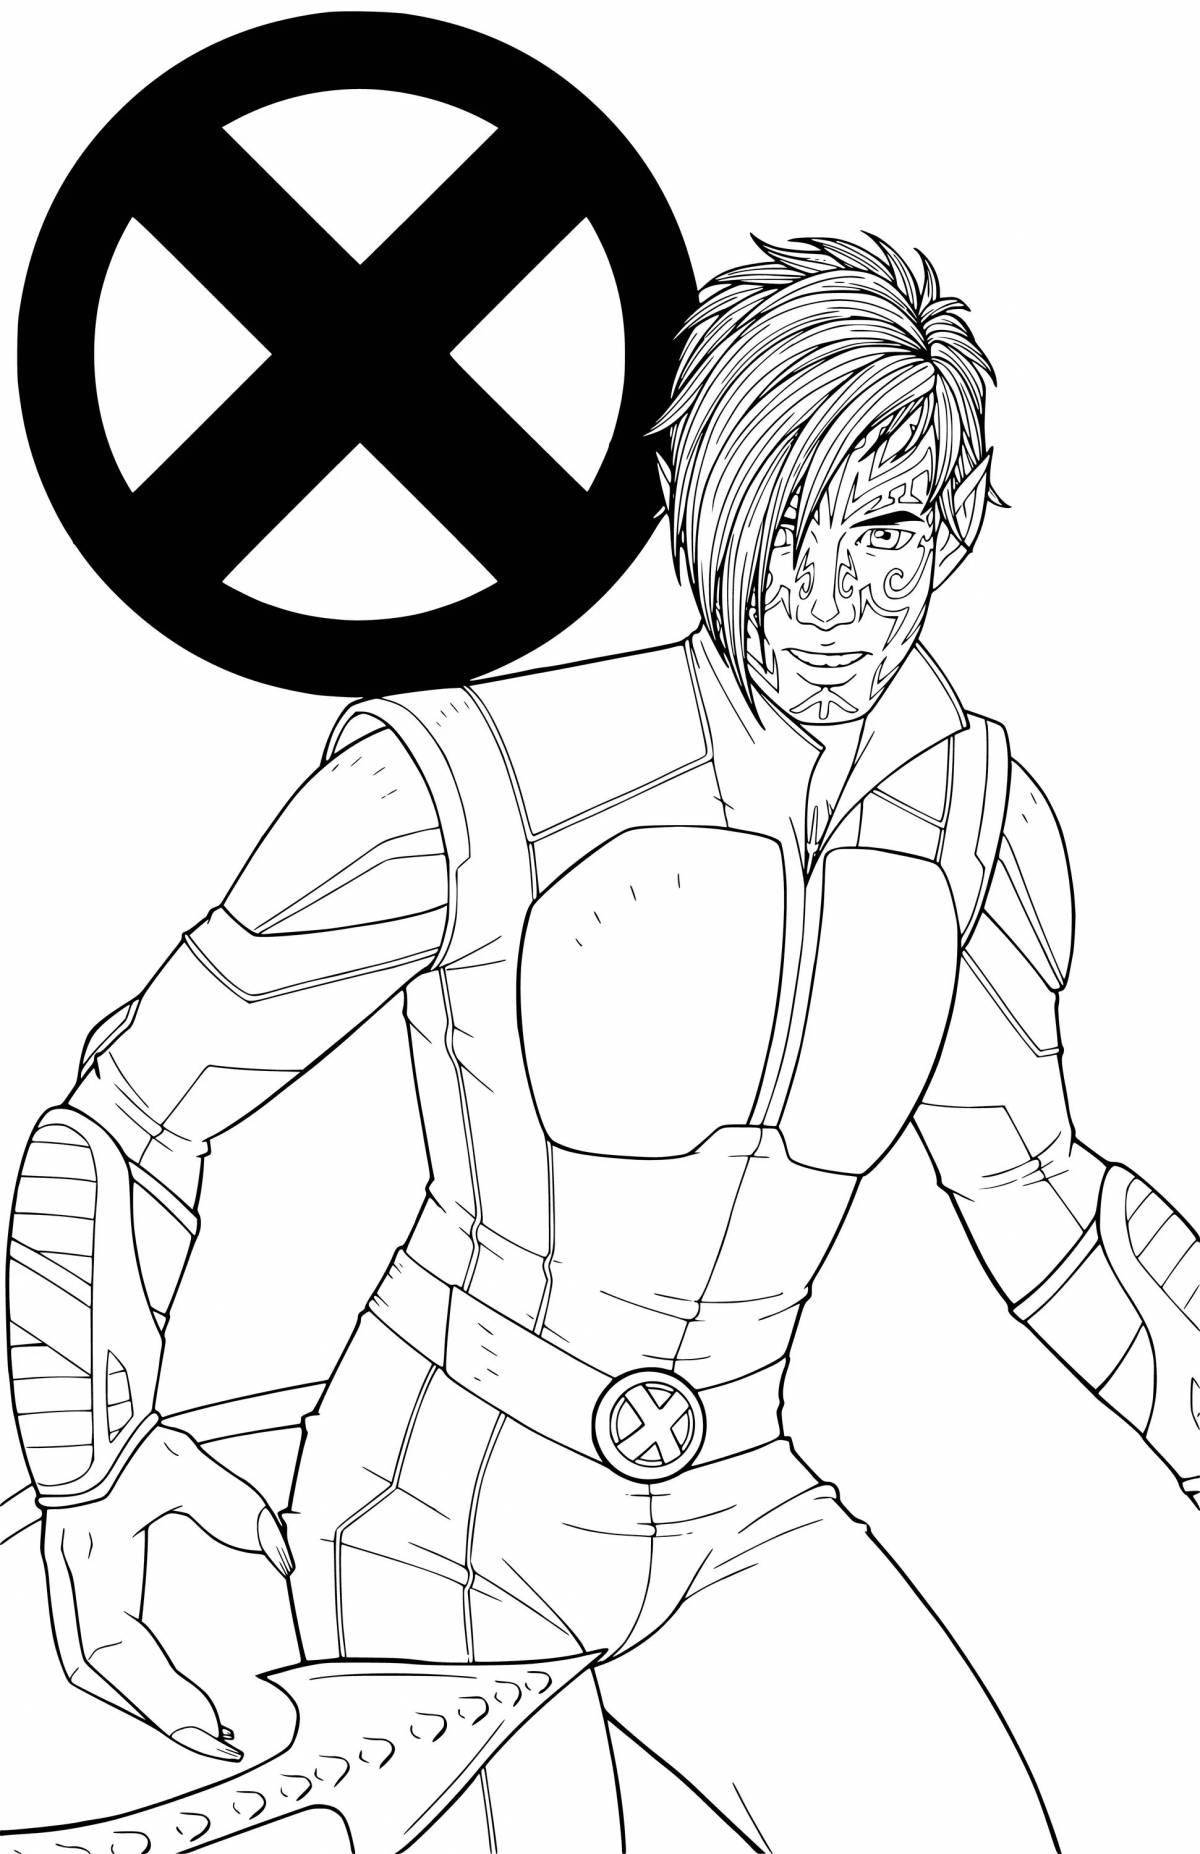 Glorious xavier thorp coloring book